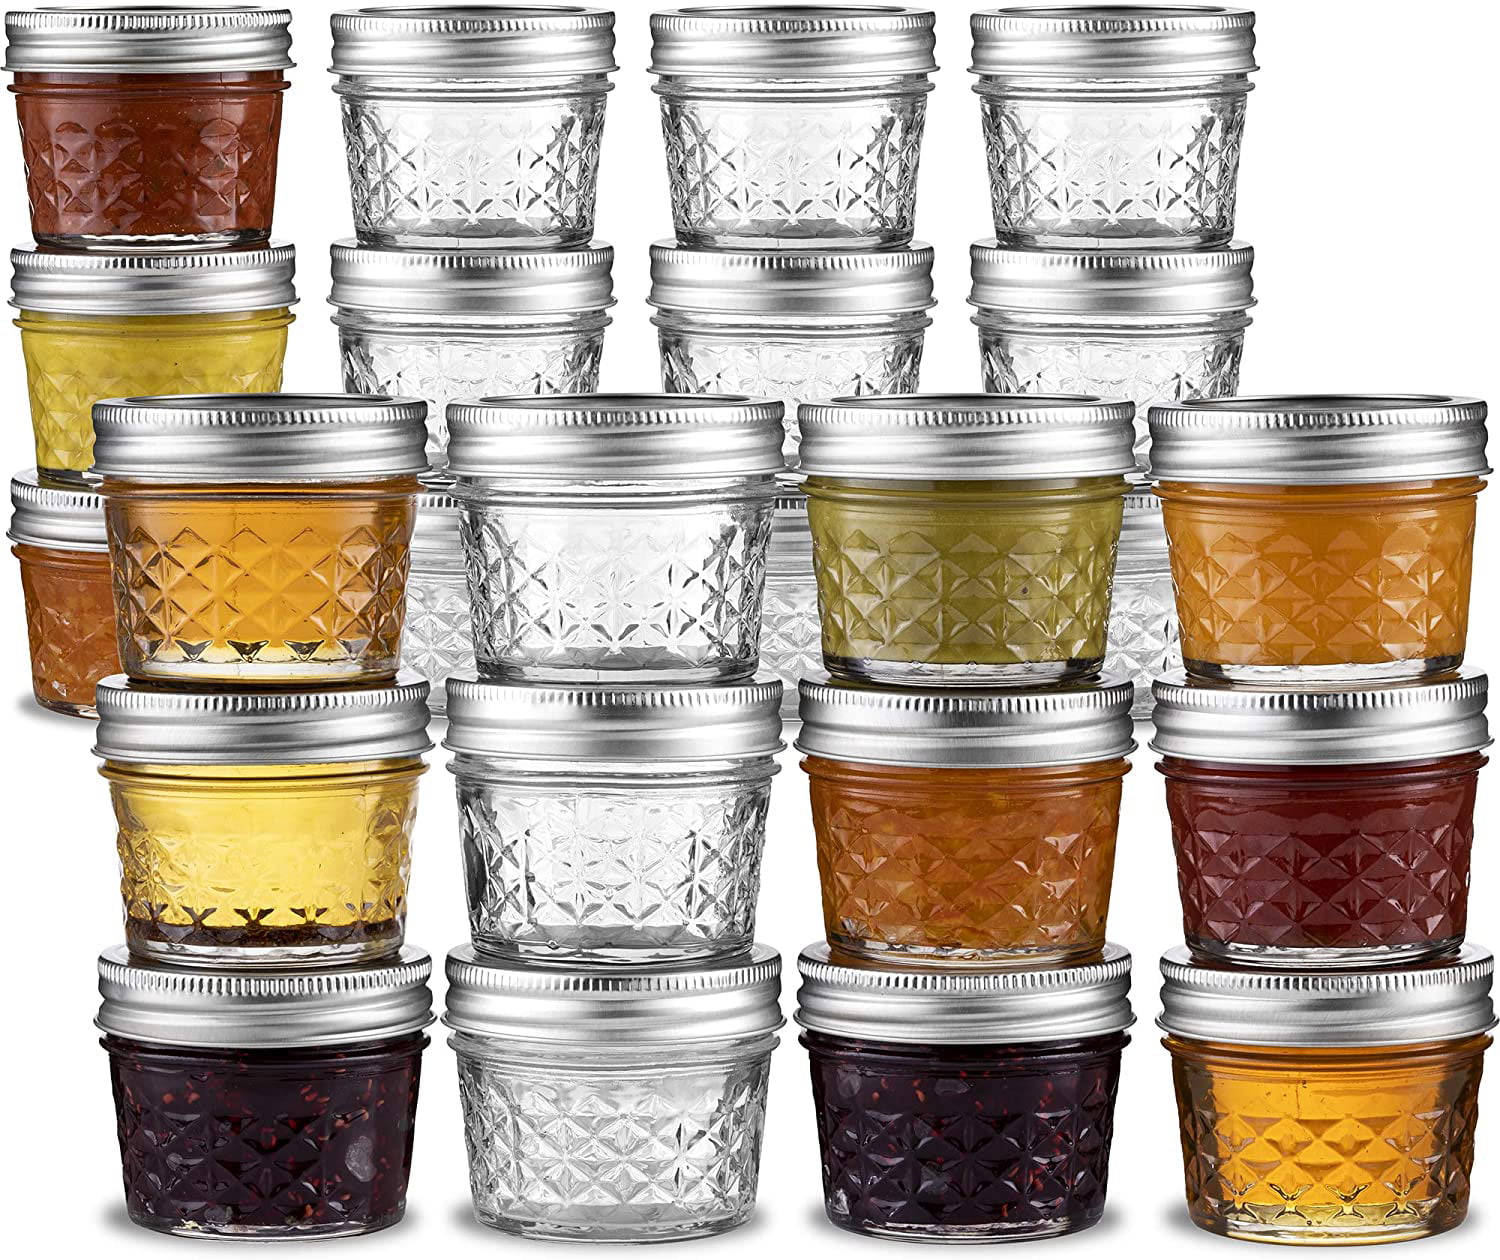 Thick Diamond Quilted Jelly Jar Drinking Glasses Set of 4 Everyday